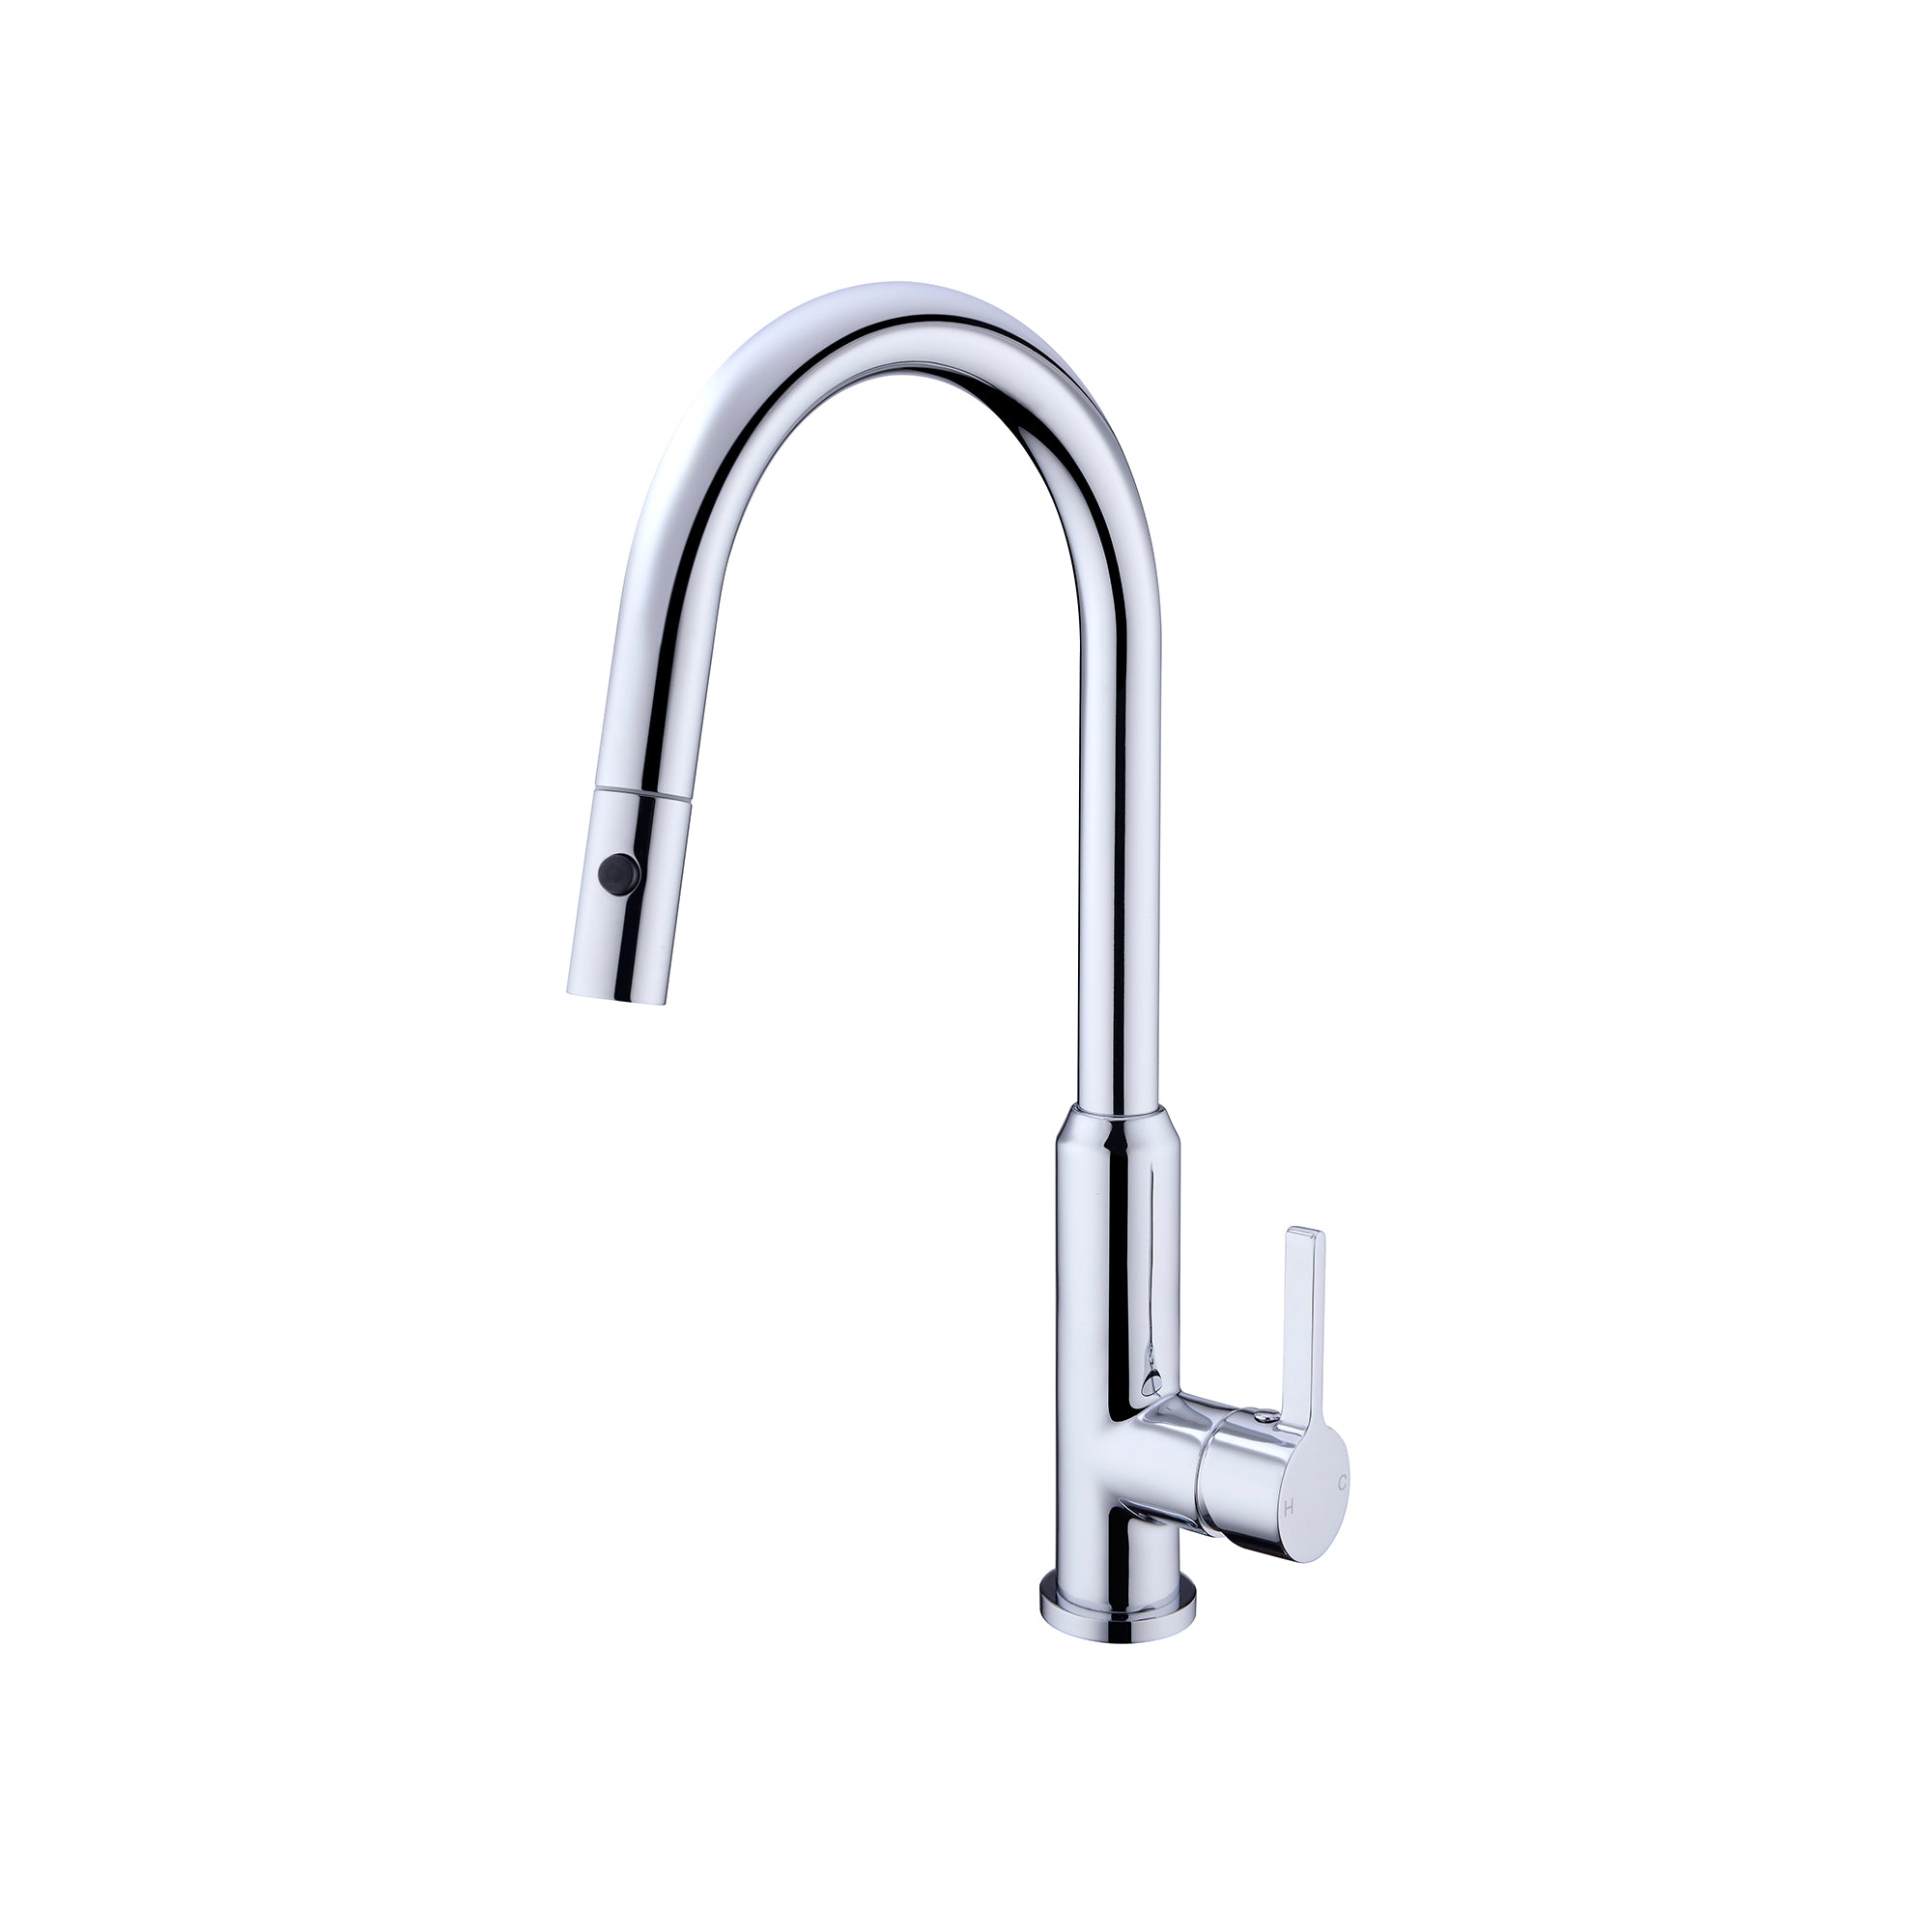 Nero Pearl Gooseneck Pullout Sink Mixer with Vegie Spray Chrome NR231708CH